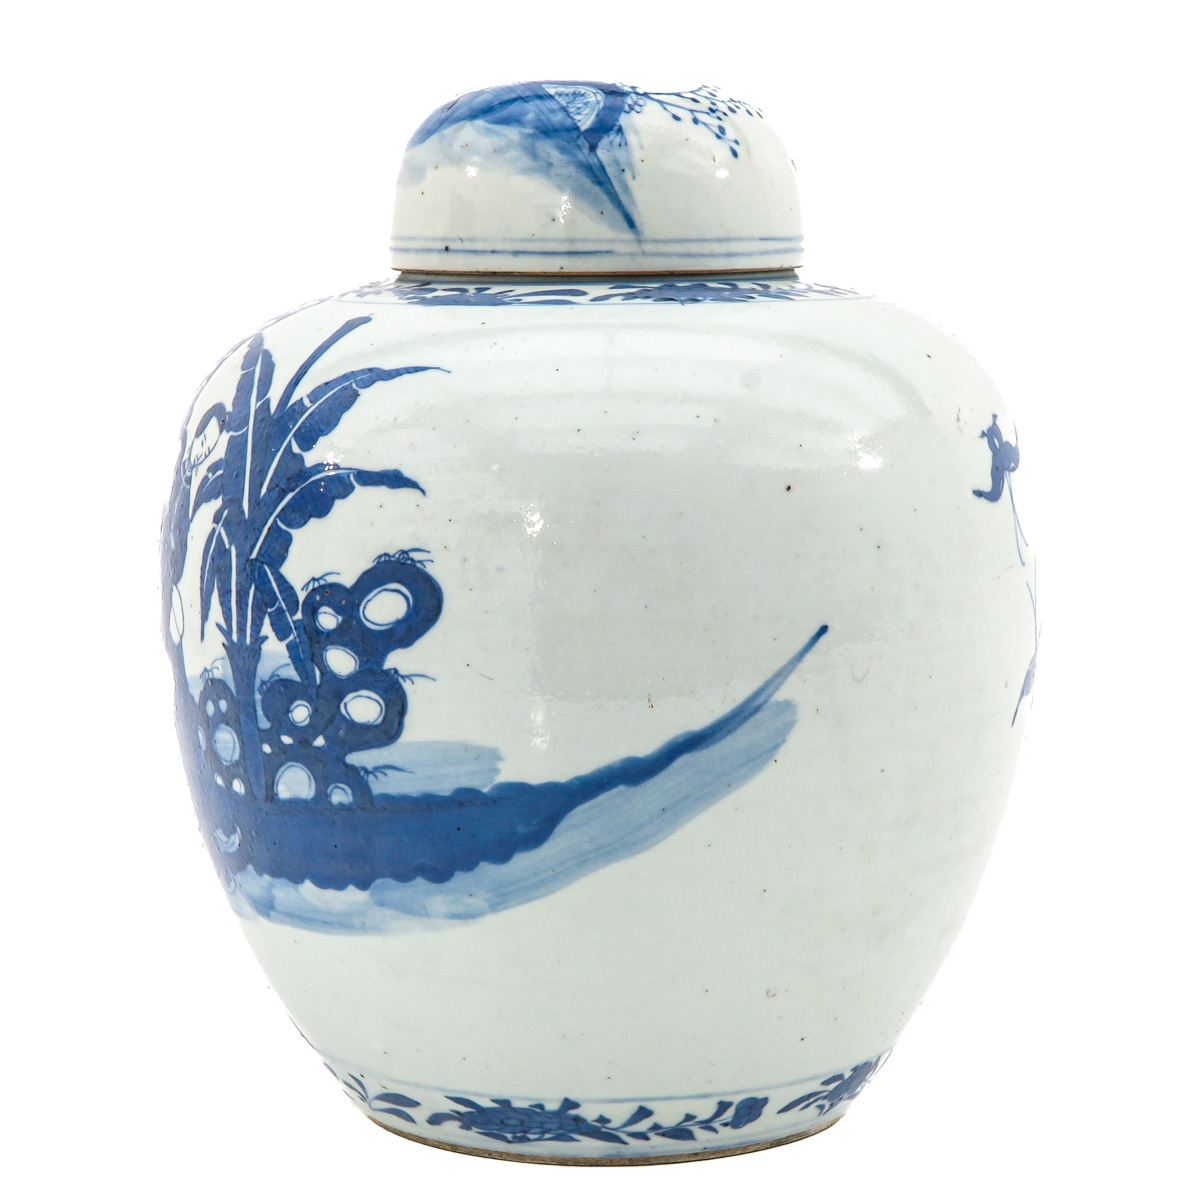 A Blue and White Ginger Jar - Image 2 of 10